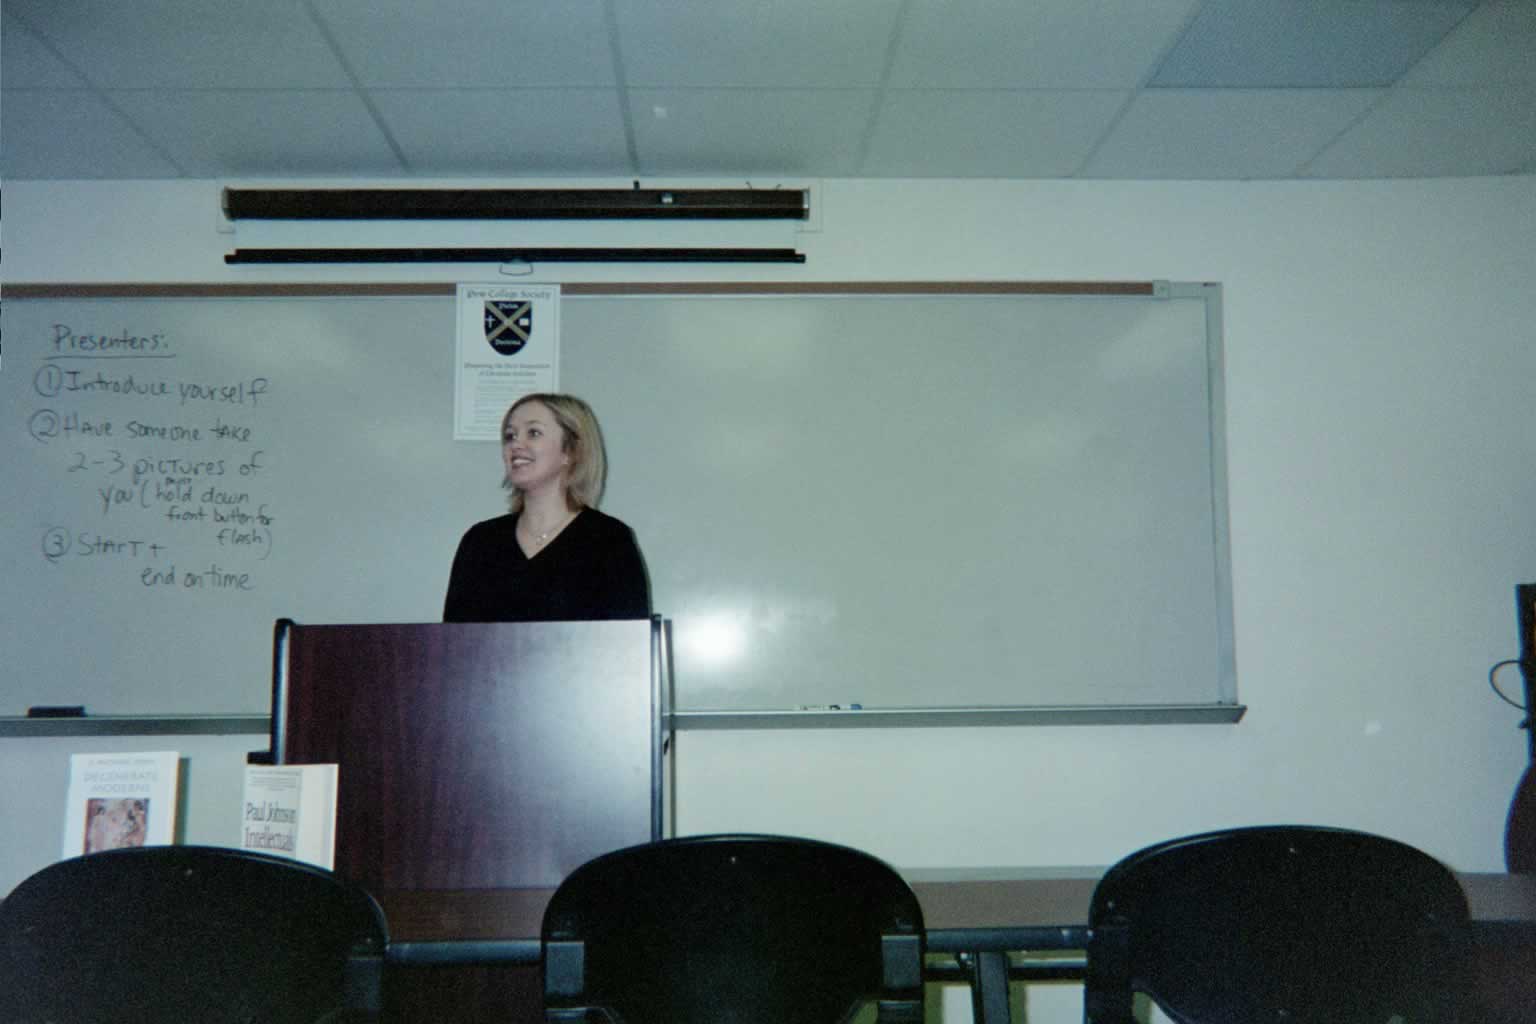 picture of a woman speaking behind a podium